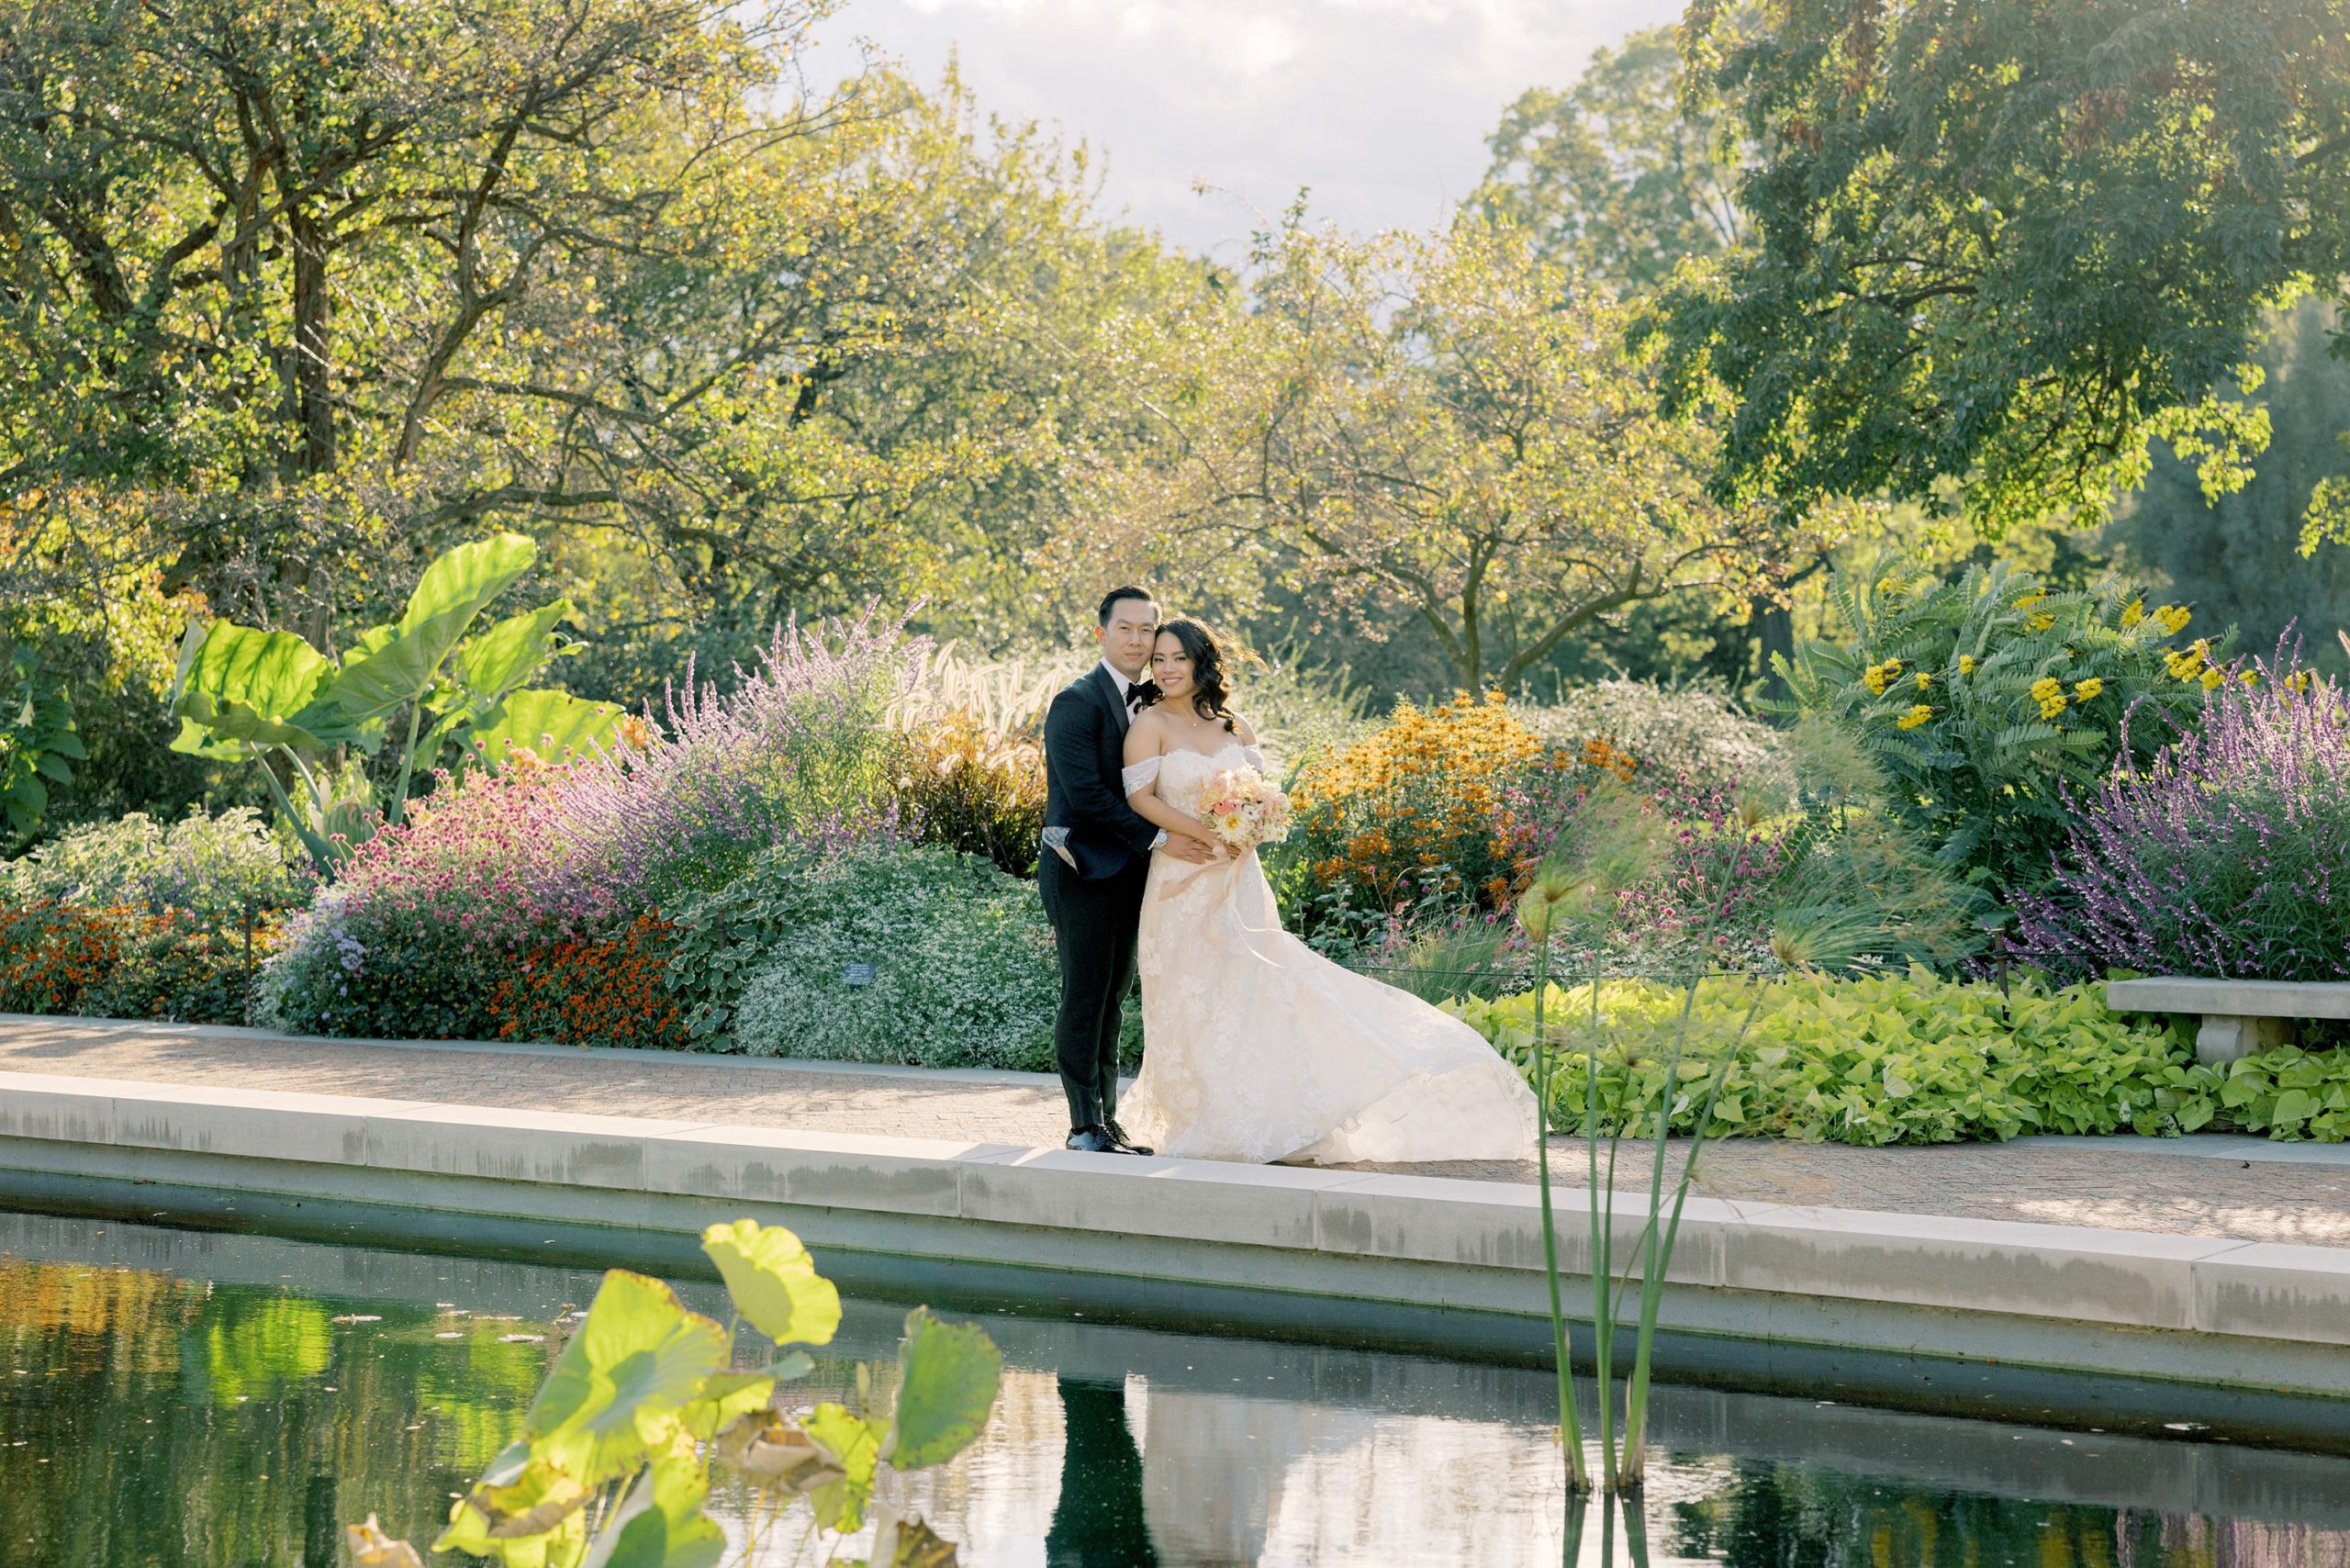 Intimate wedding with bride and groom at Brooklyn Botanical Garden